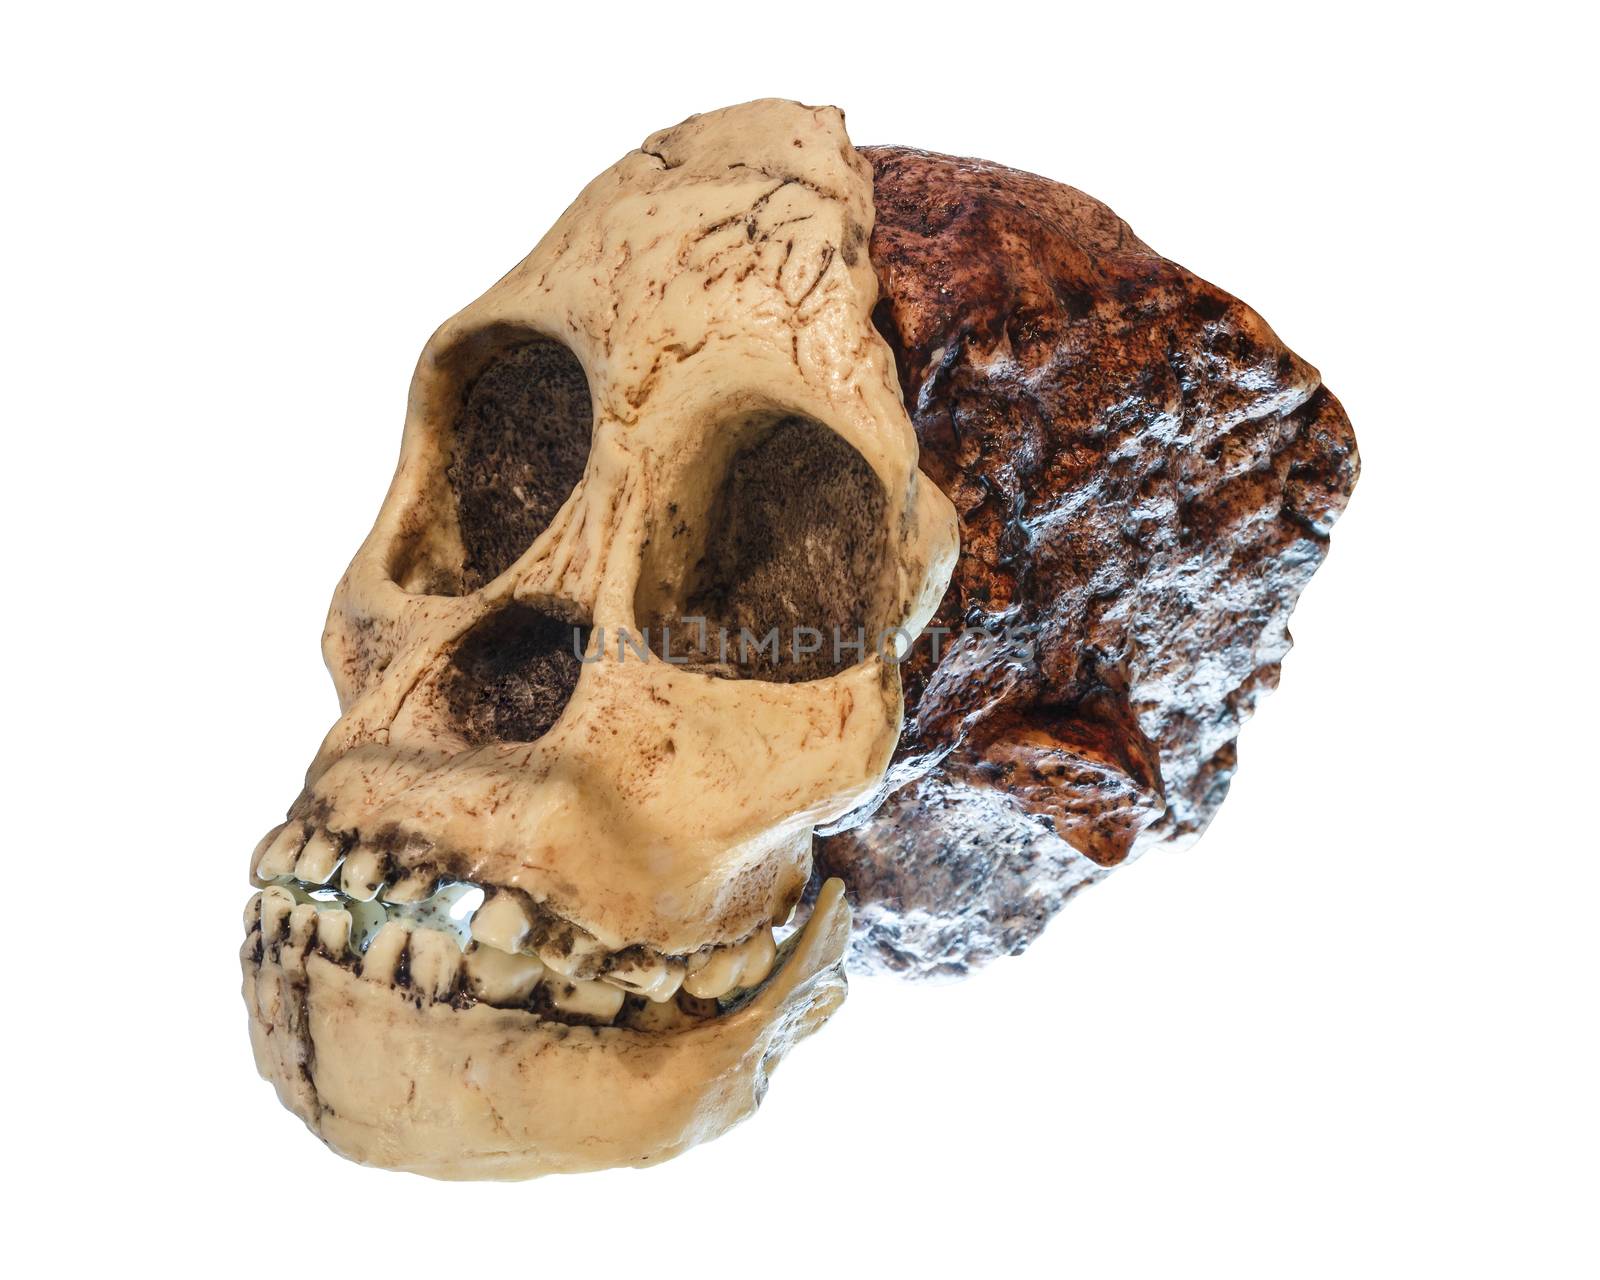 Australopithecus africanus Skull . ( Taung Child ) . Dated to 2.5 million years ago . Discovered in 1924 in a limestone quarry near Taung village , South africa by stockdevil